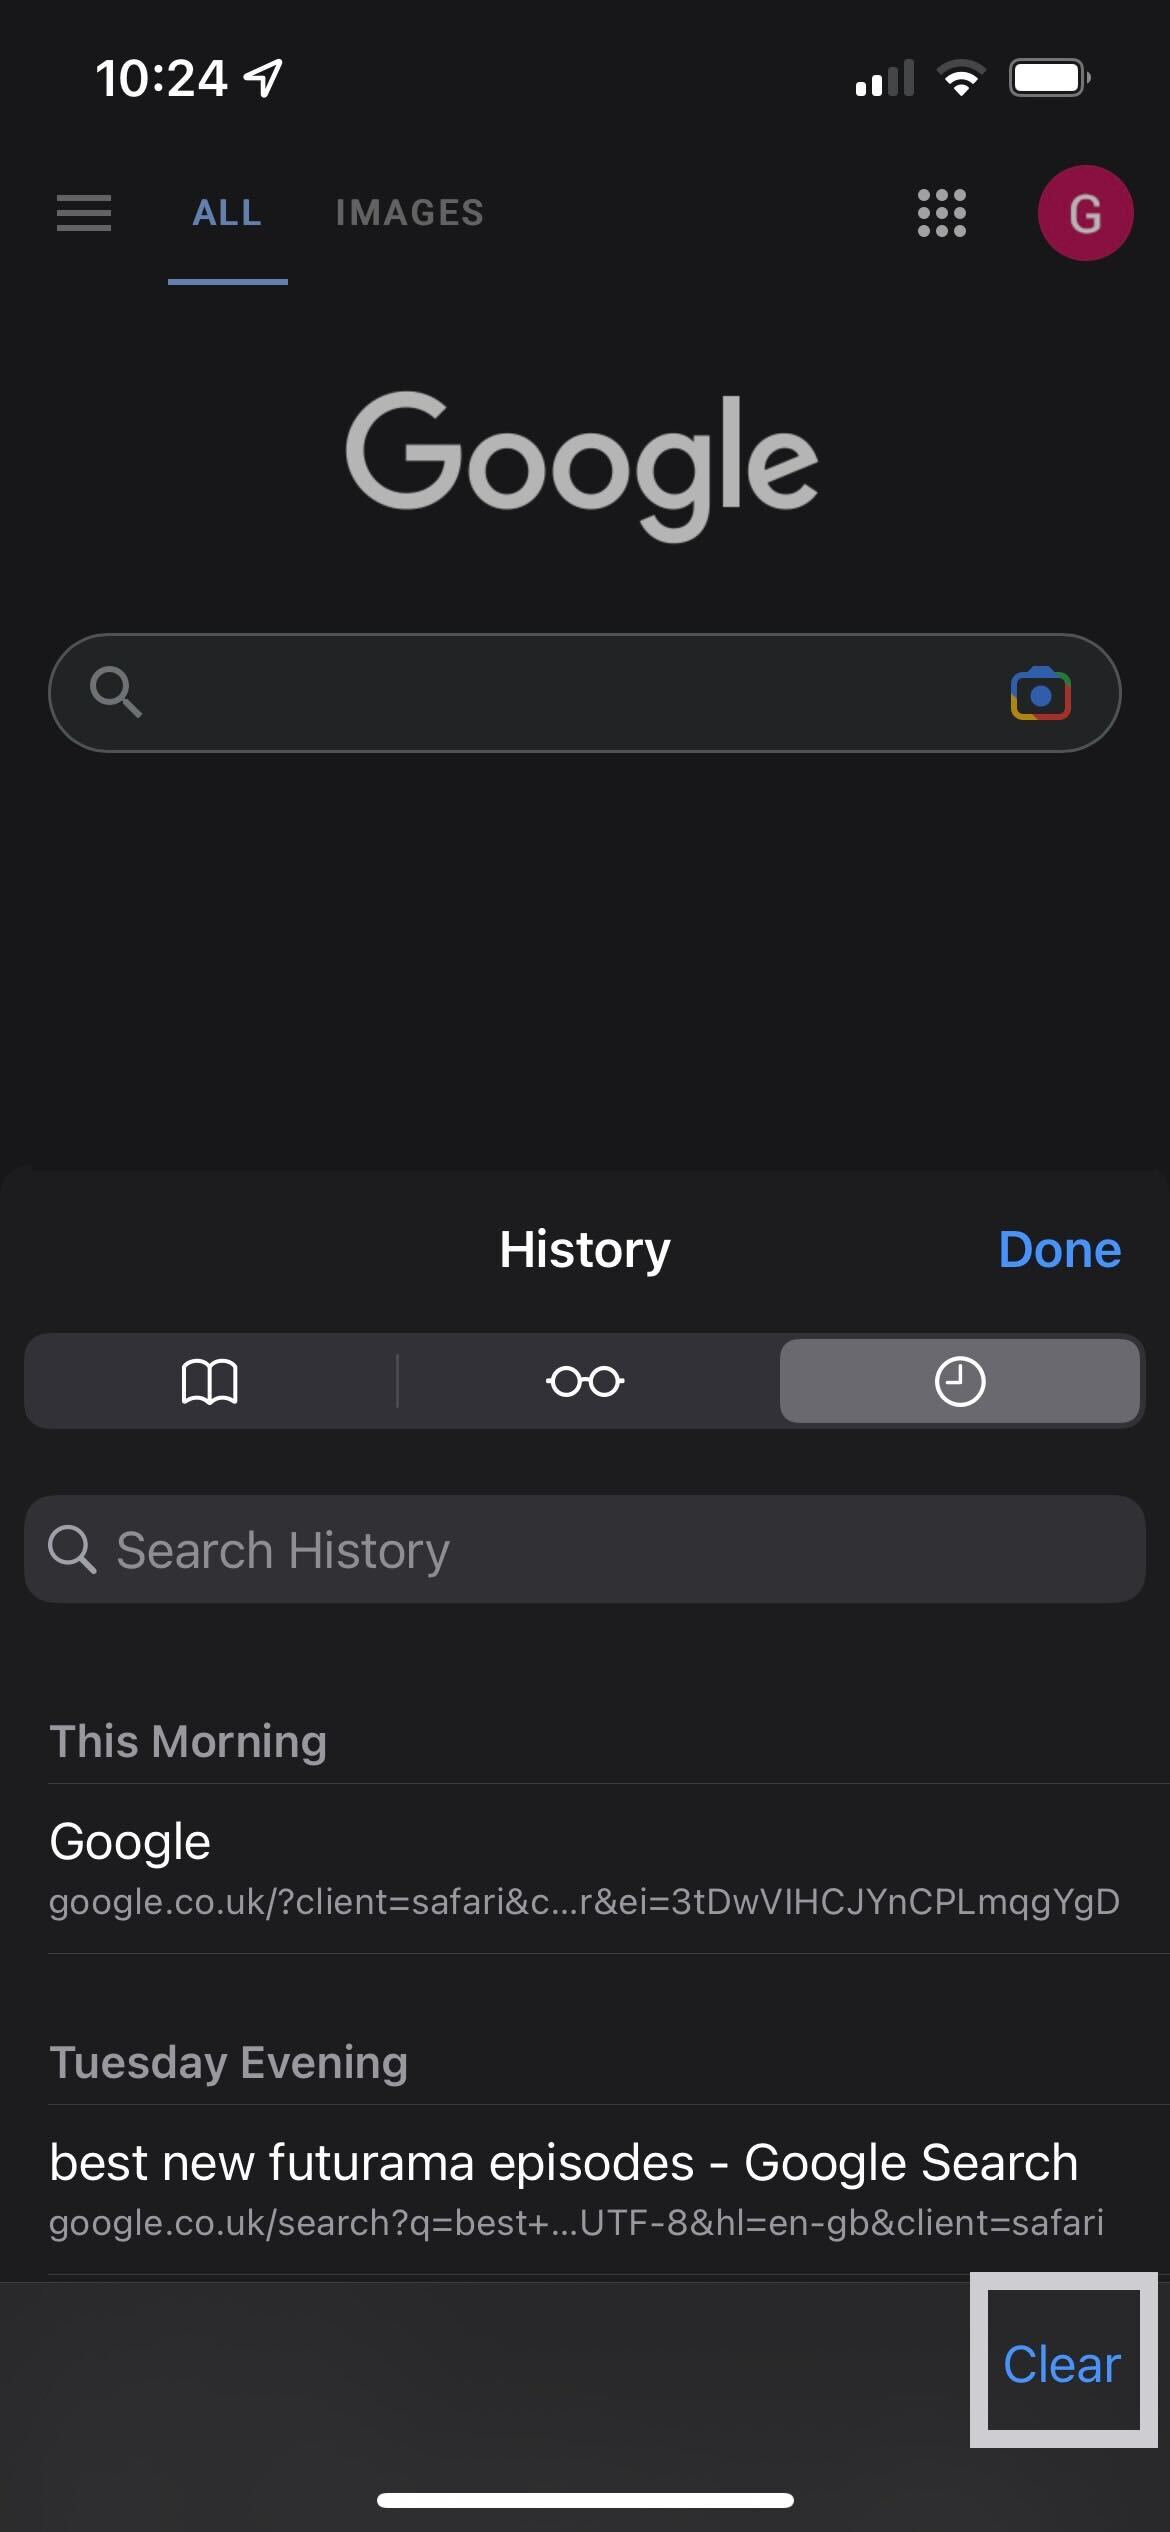 Clear all history button on iOS